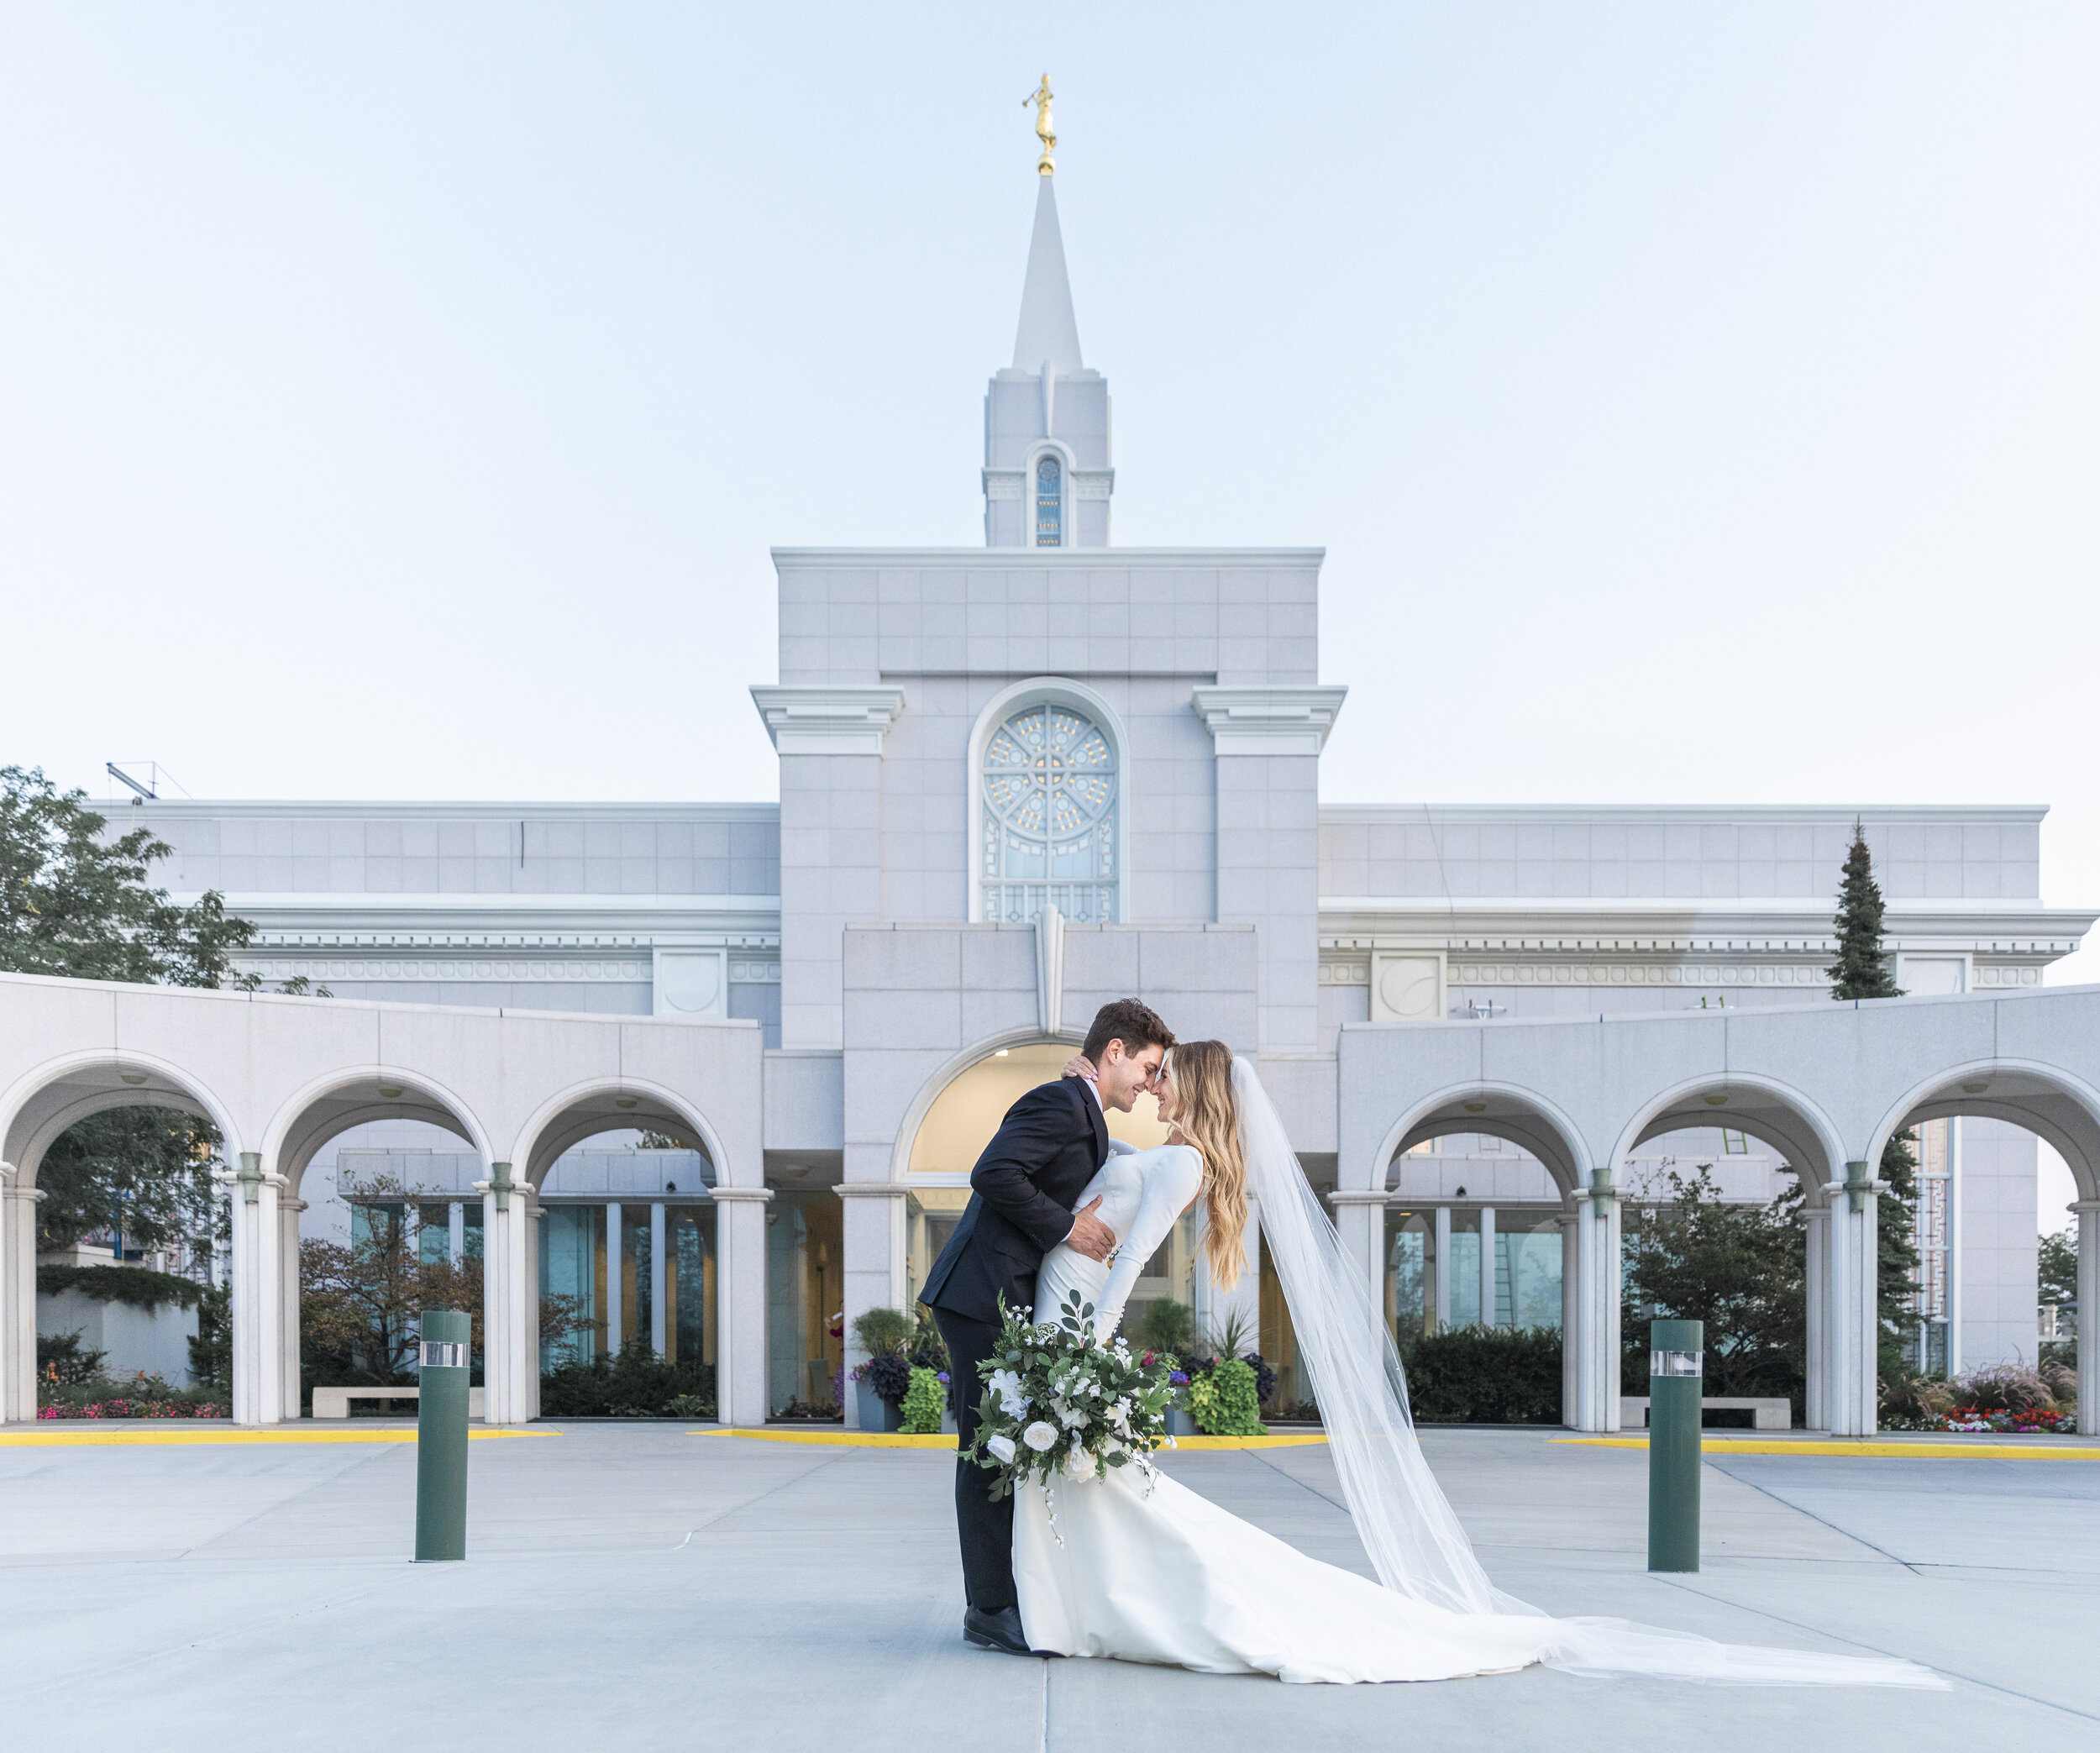  Breathtaking photo of a bride and groom going in for a kiss in front of the Bountiful Latter-Day Saint Temple captured by Savanna Richardson Photography. couple dip in front of LDS temple stunning temple wedding portraits #savannarichardsonphotograp